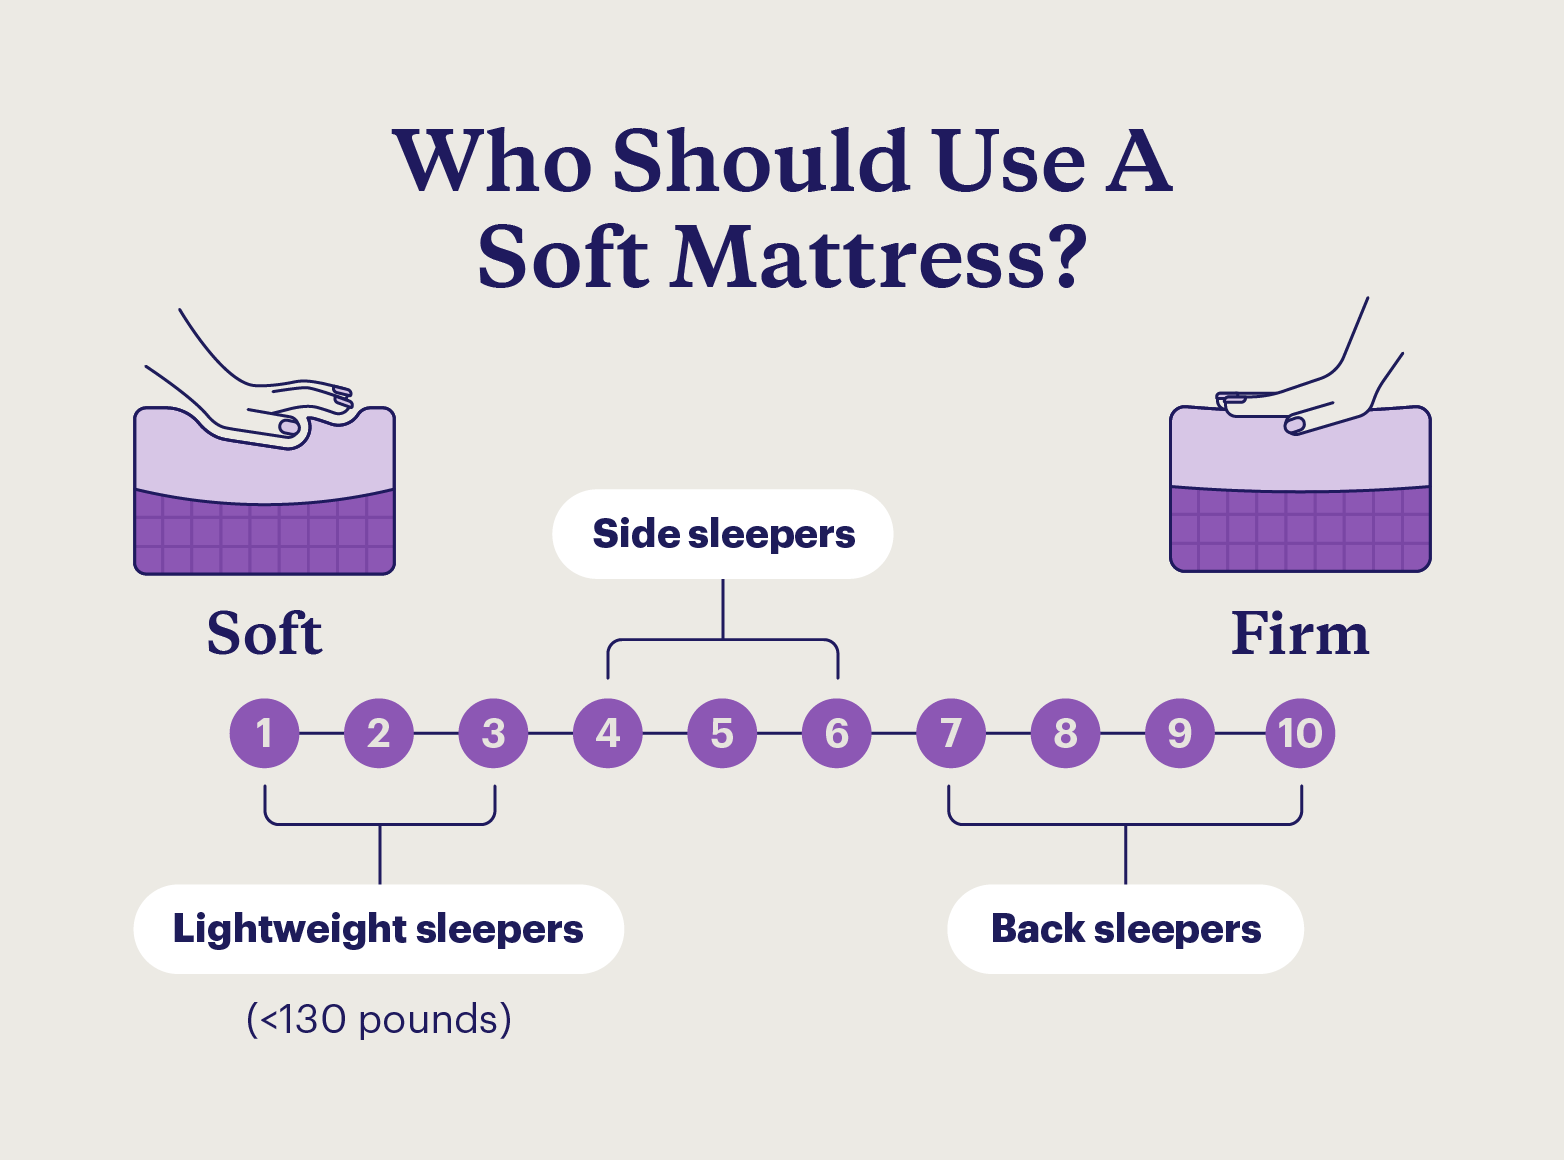 An illustration pairing the mattress firmness scale with sleeping positions and sleeper weight